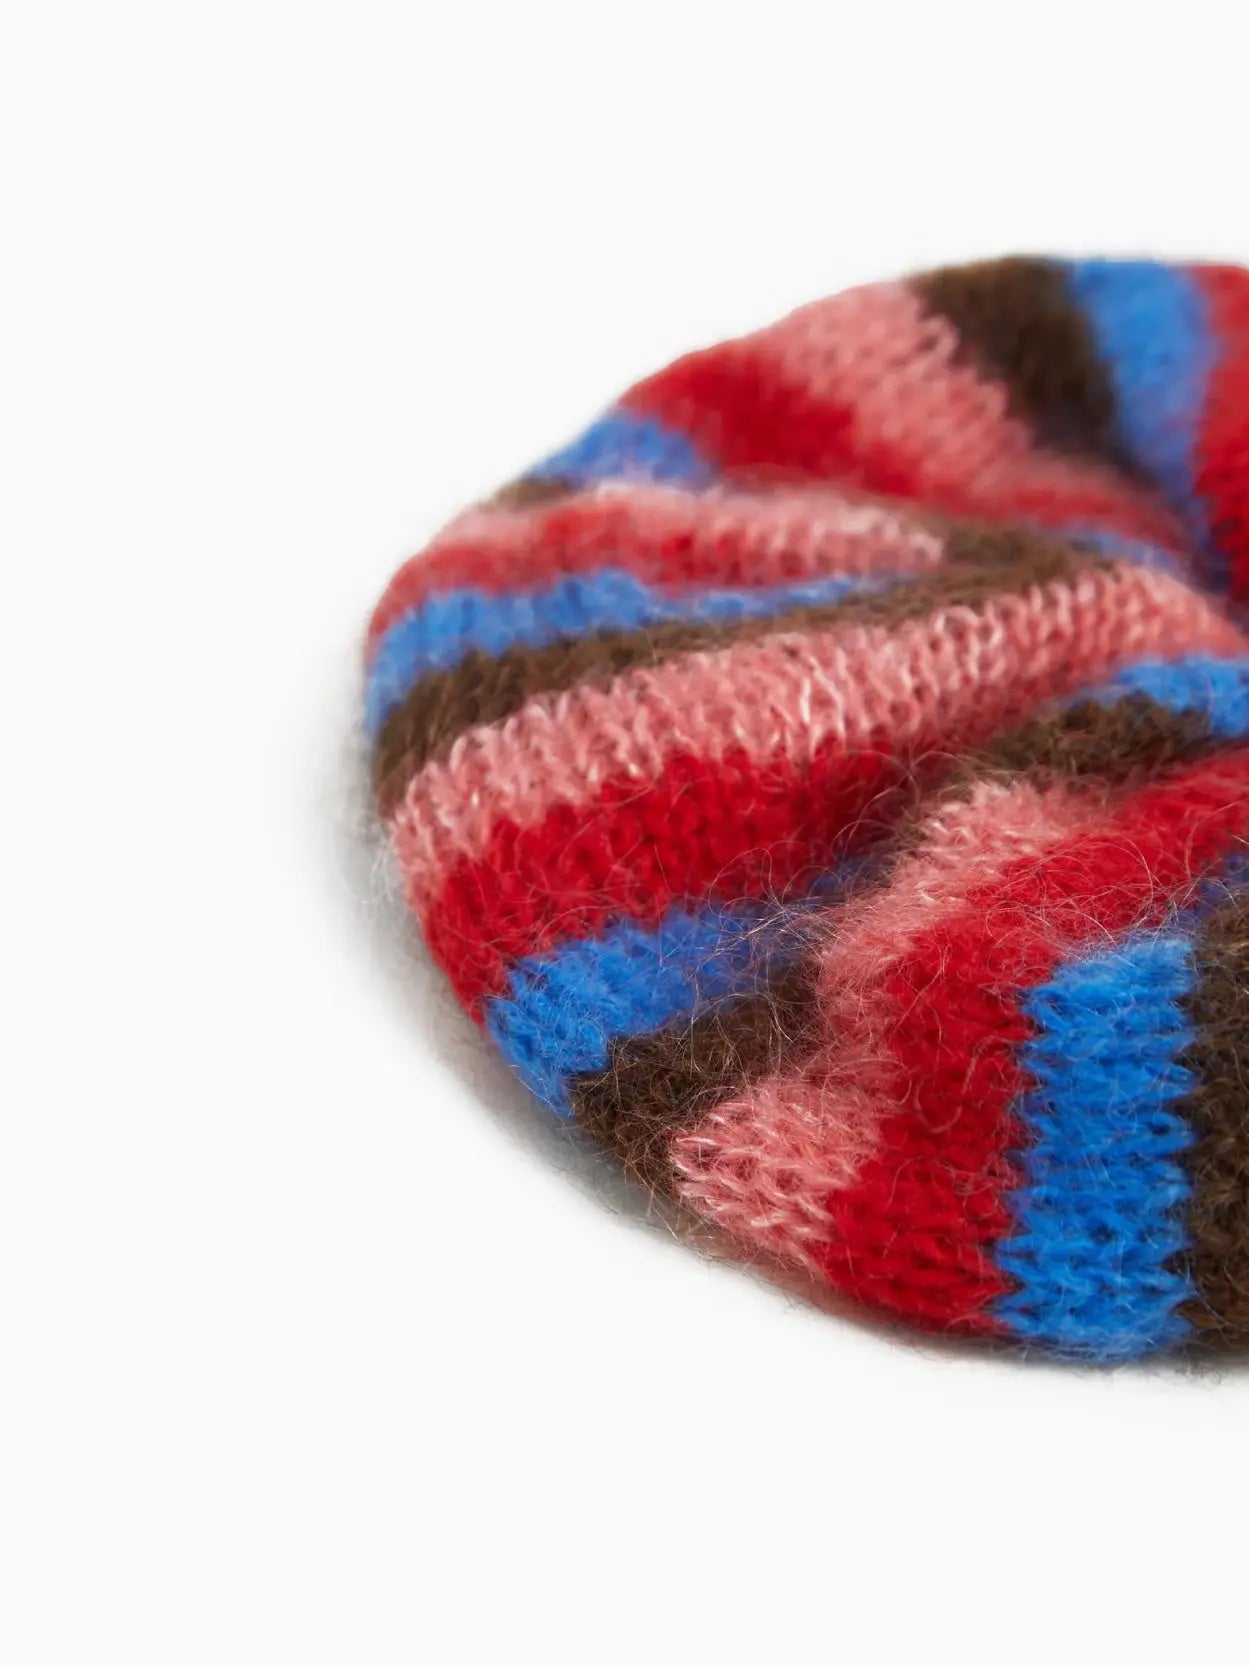 A round, knitted Mencia Scrunchie by Tomasa featuring alternating stripes of red, pink, blue, and brown. It has a small white label that reads "nanamica" sewn onto one of the red stripes. The scrunchie is displayed against a plain white background, available exclusively at Bassal Store in Barcelona.